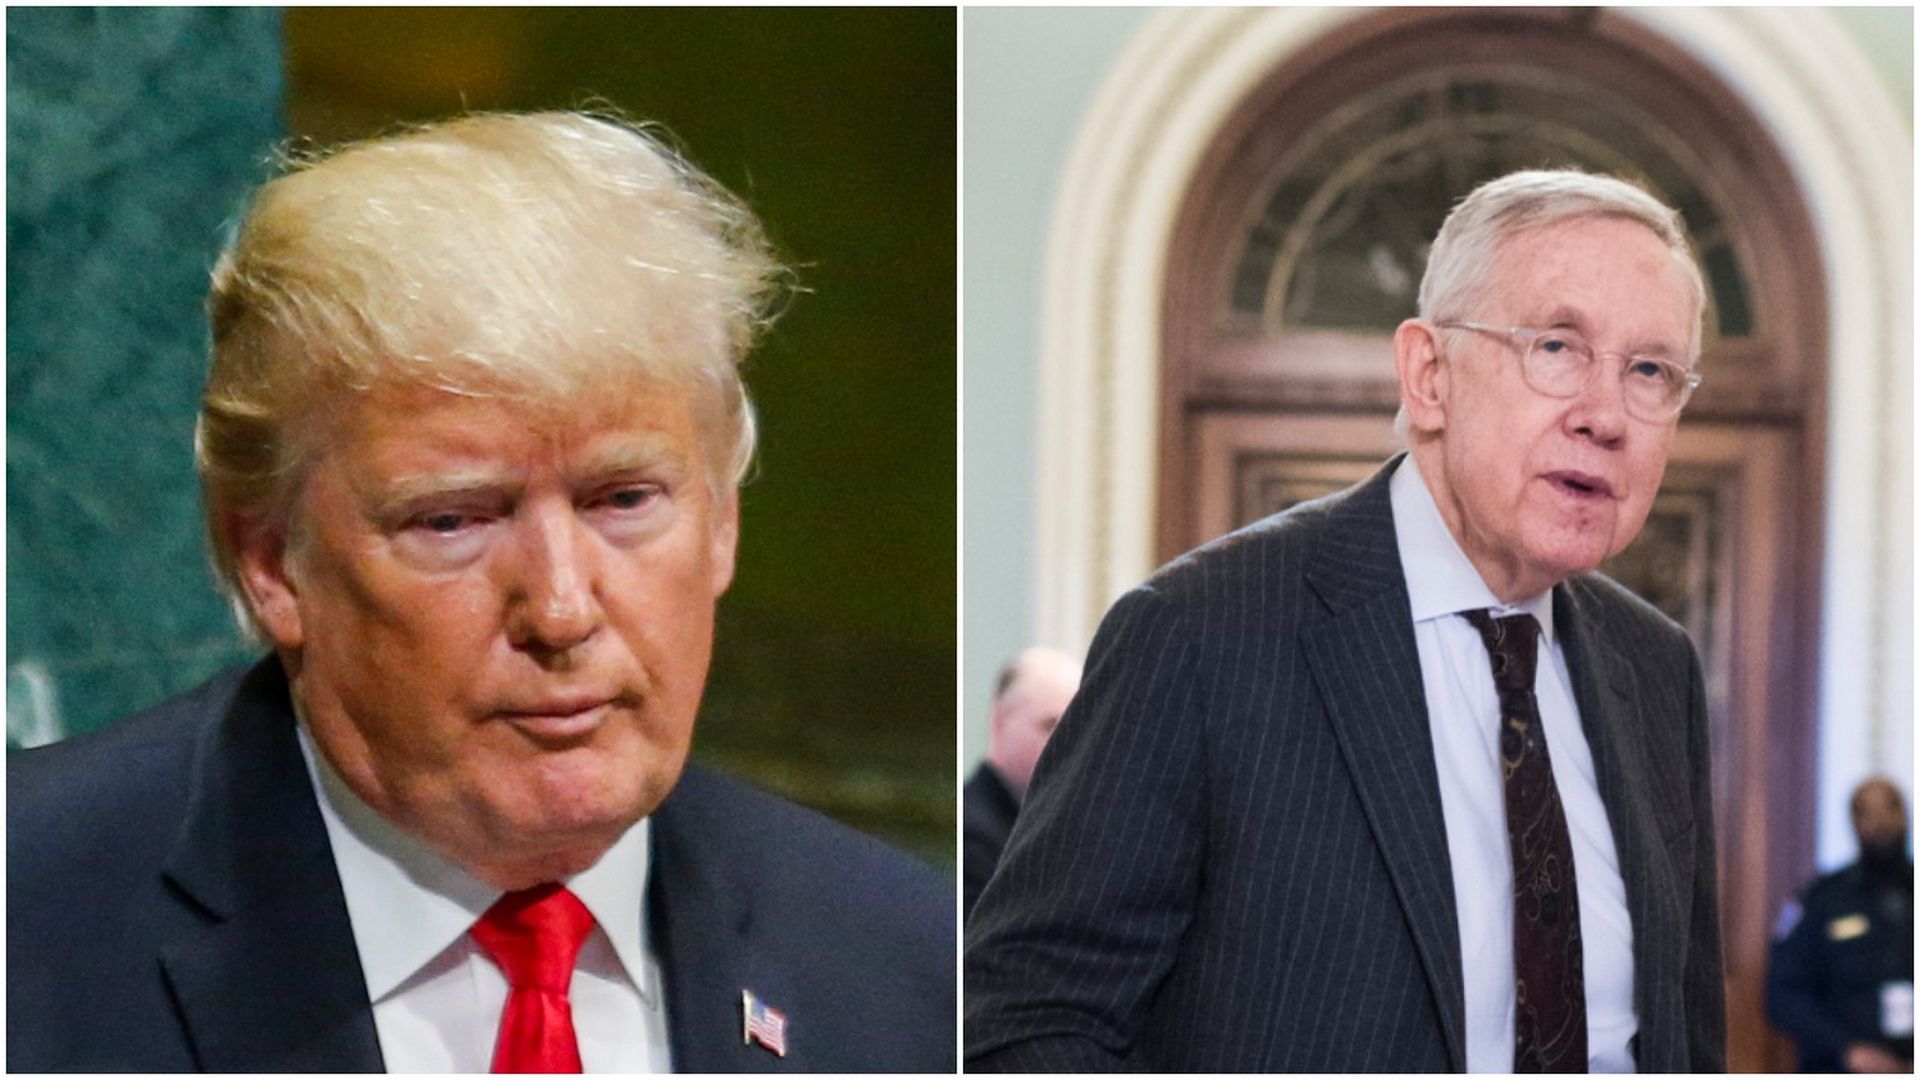 Cropped photo with Donald Trump and Harry reid